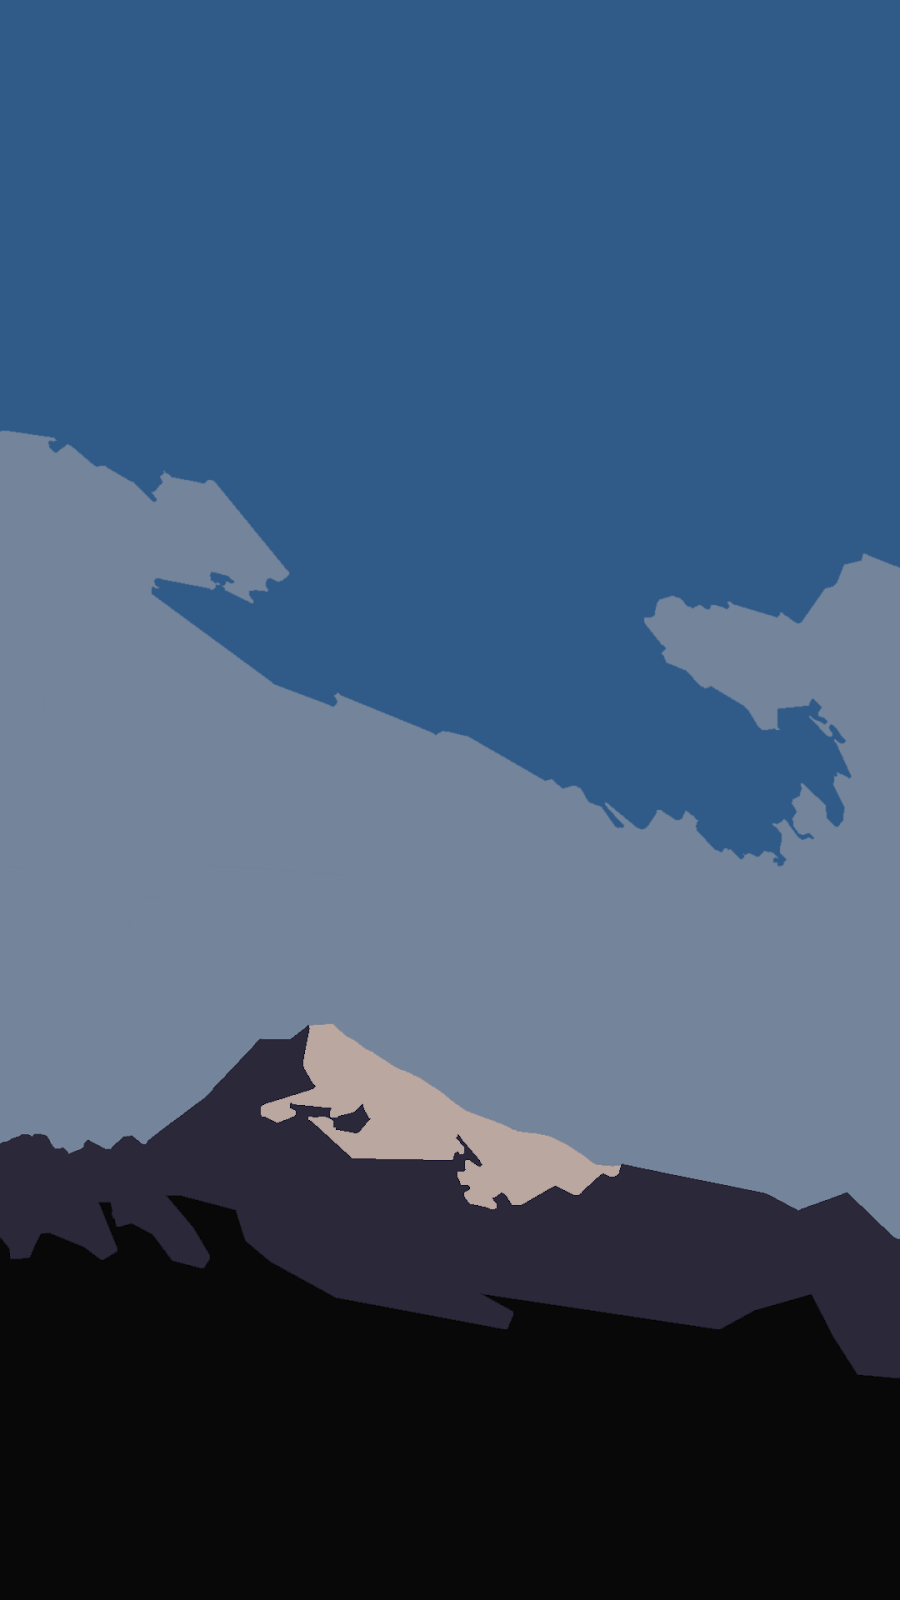 mountain wallpaper for android,sky,blue,cloud,atmosphere,illustration